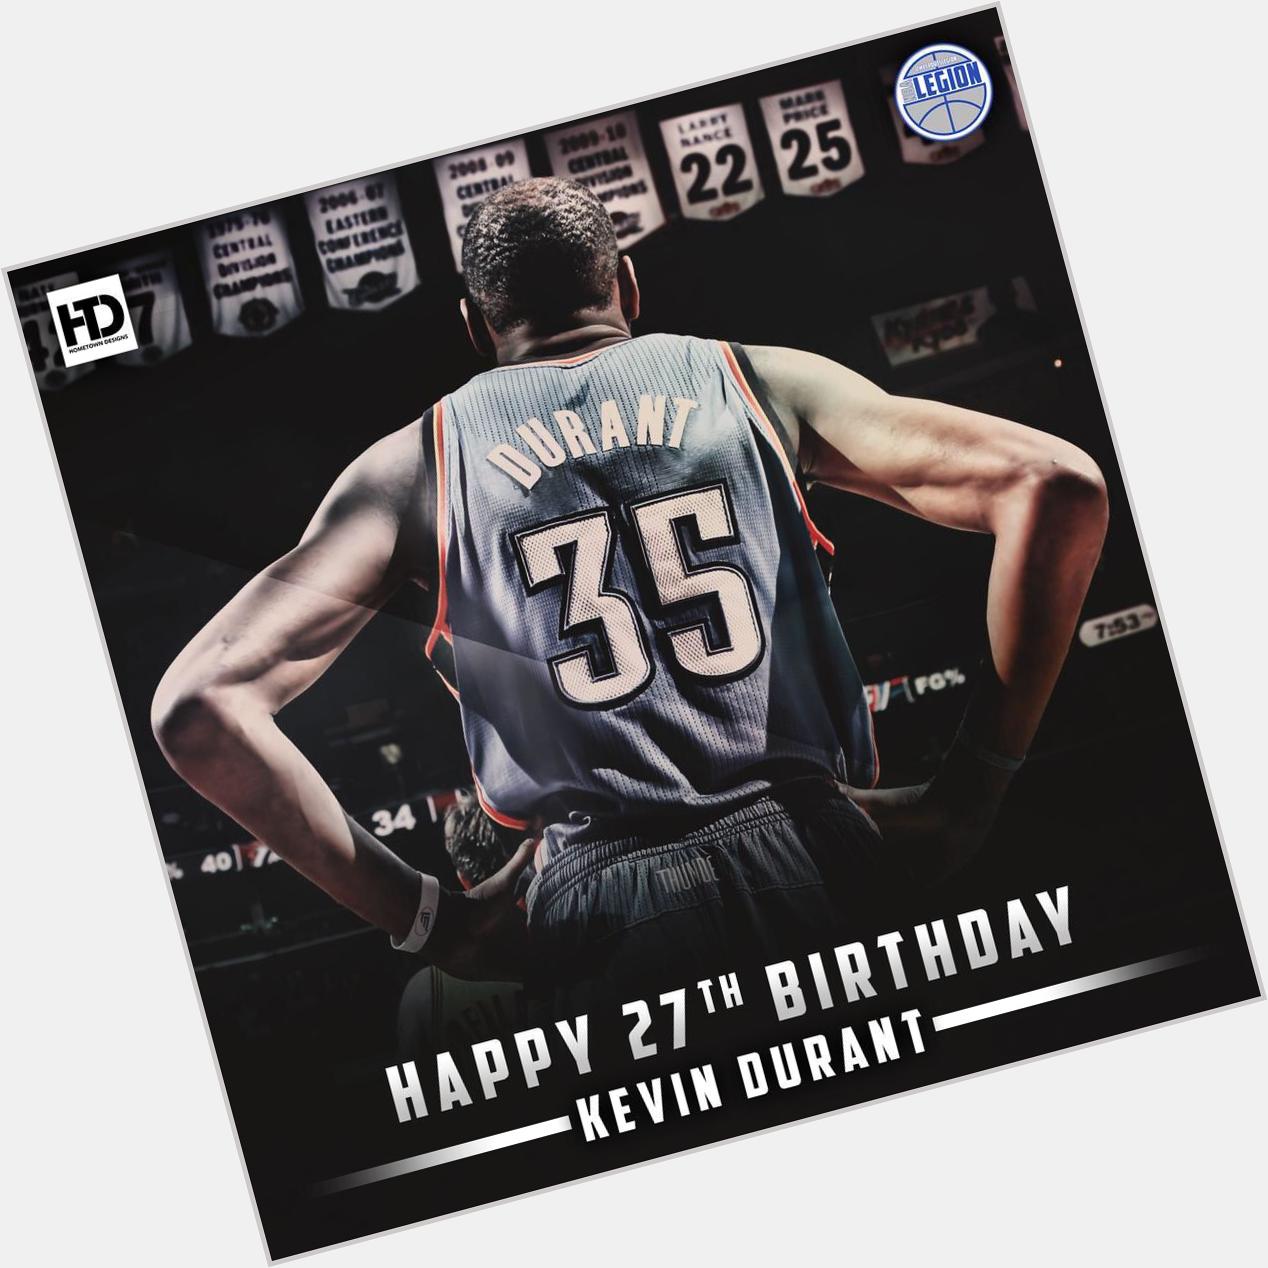     Happy 27th birthday to the man Kevin Durant! 